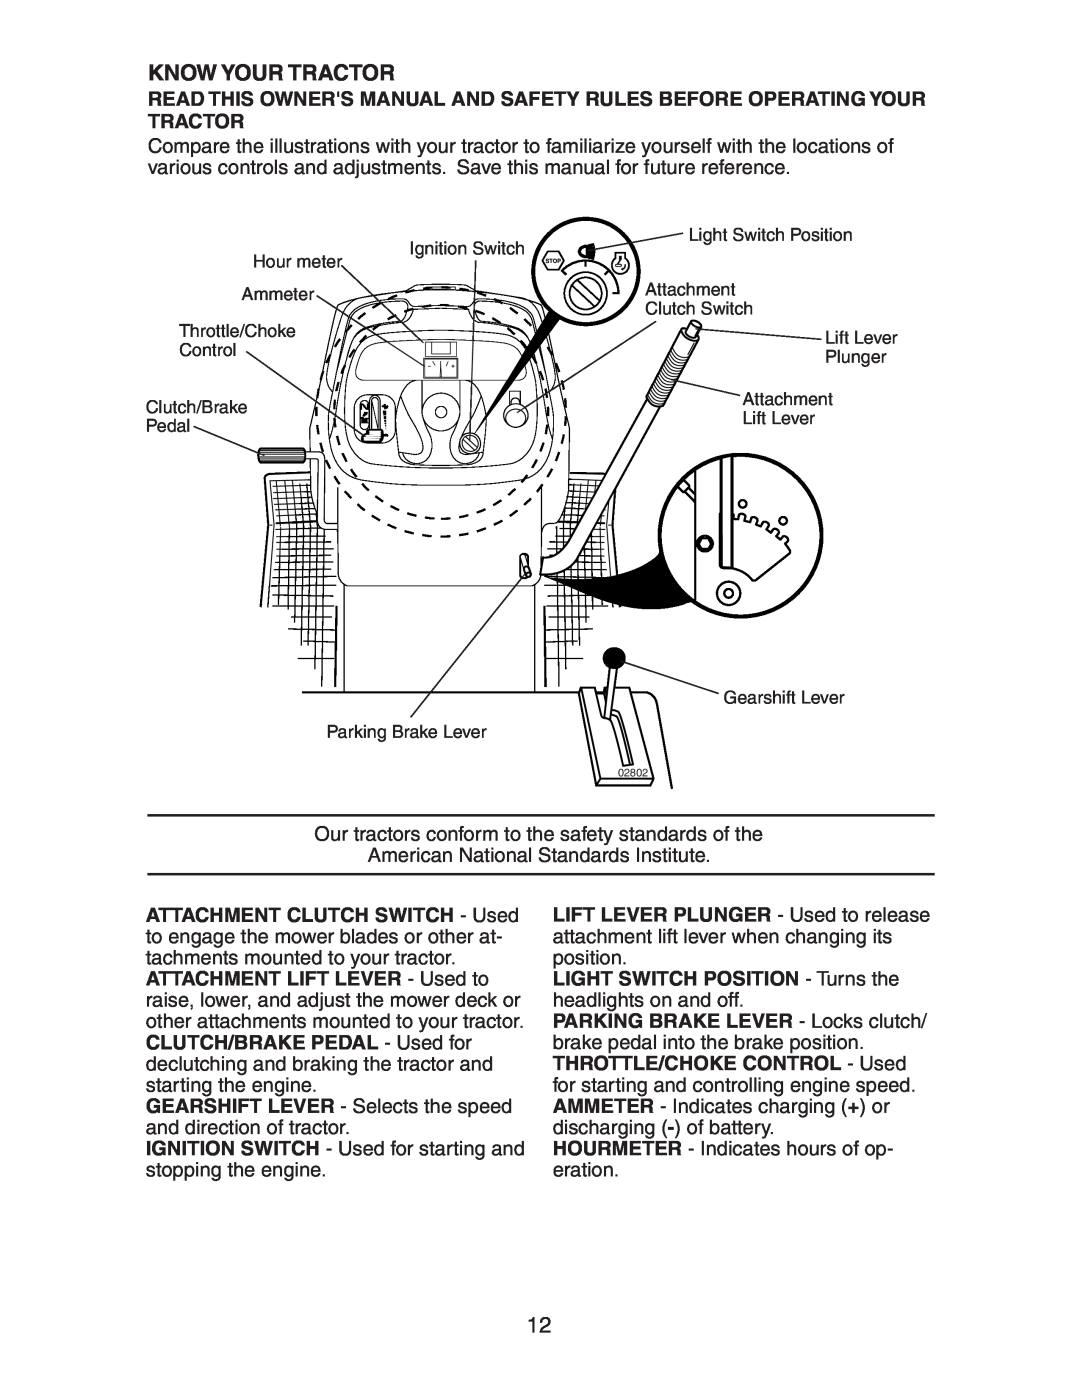 Poulan CO18542STC manual Know Your Tractor, LIGHT SWITCH POSITION - Turns the headlights on and off 